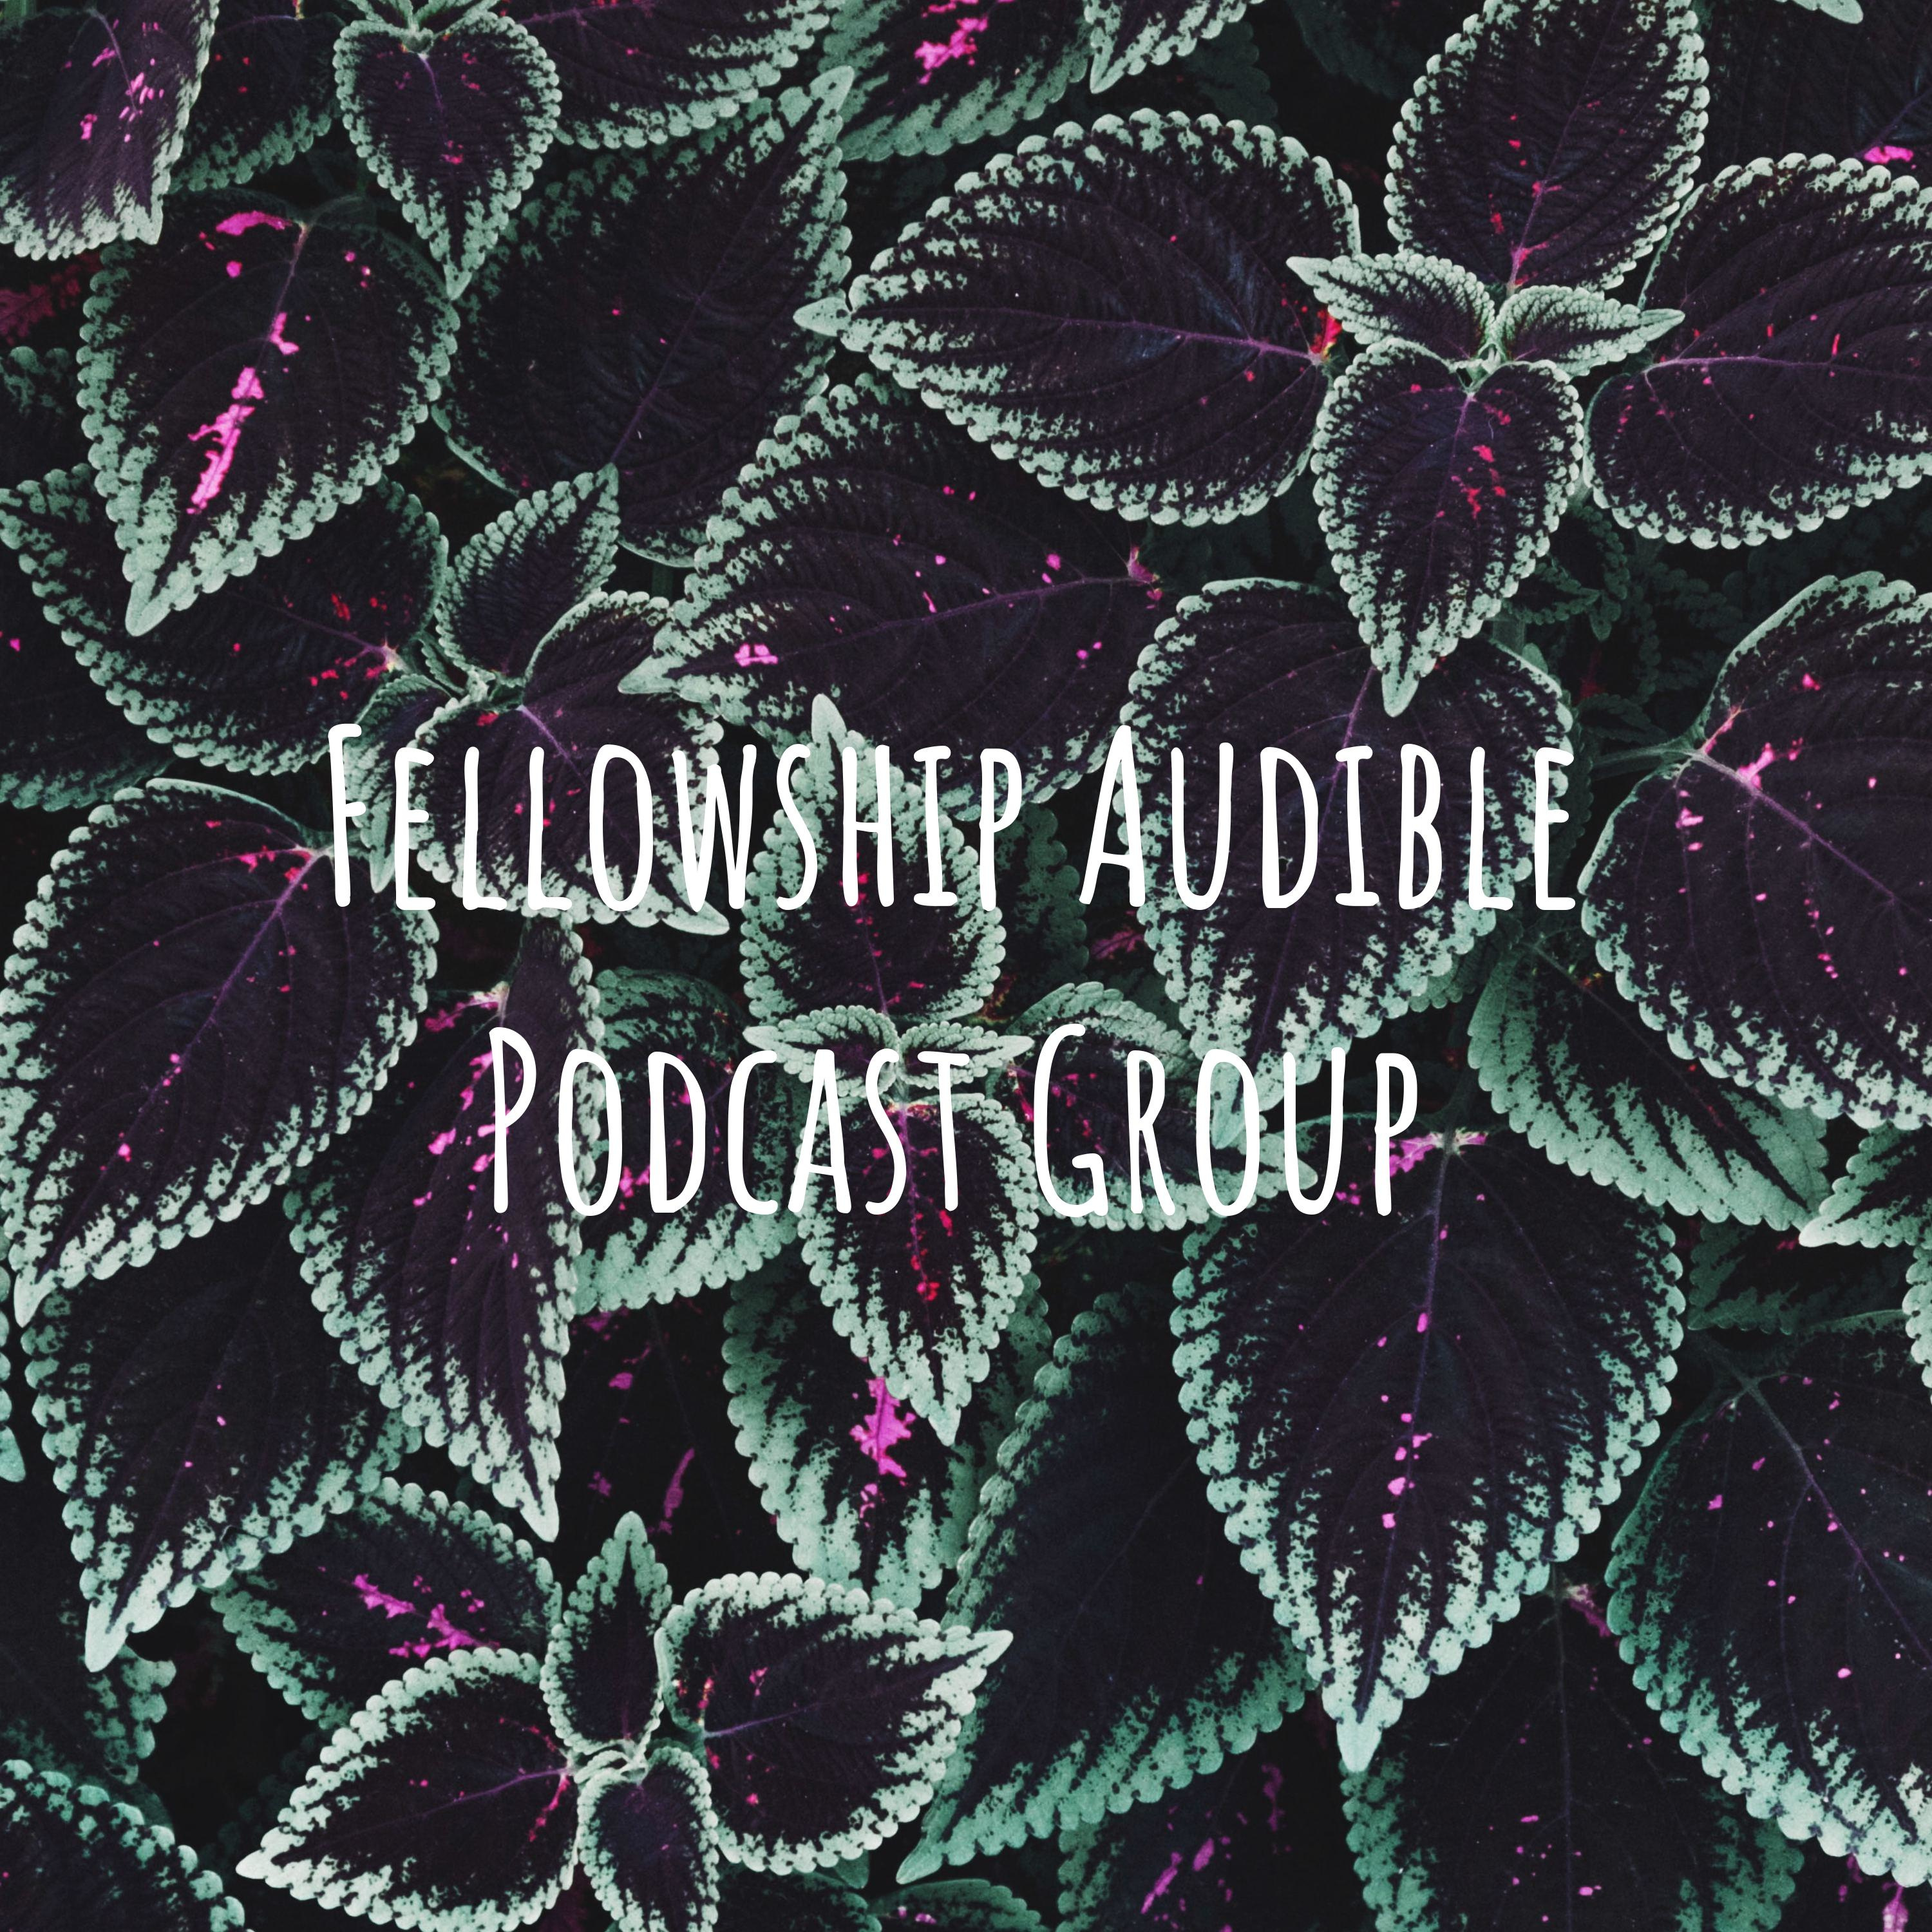 Fellowship Audible Podcast Group is on Spotify and Google Podcasts